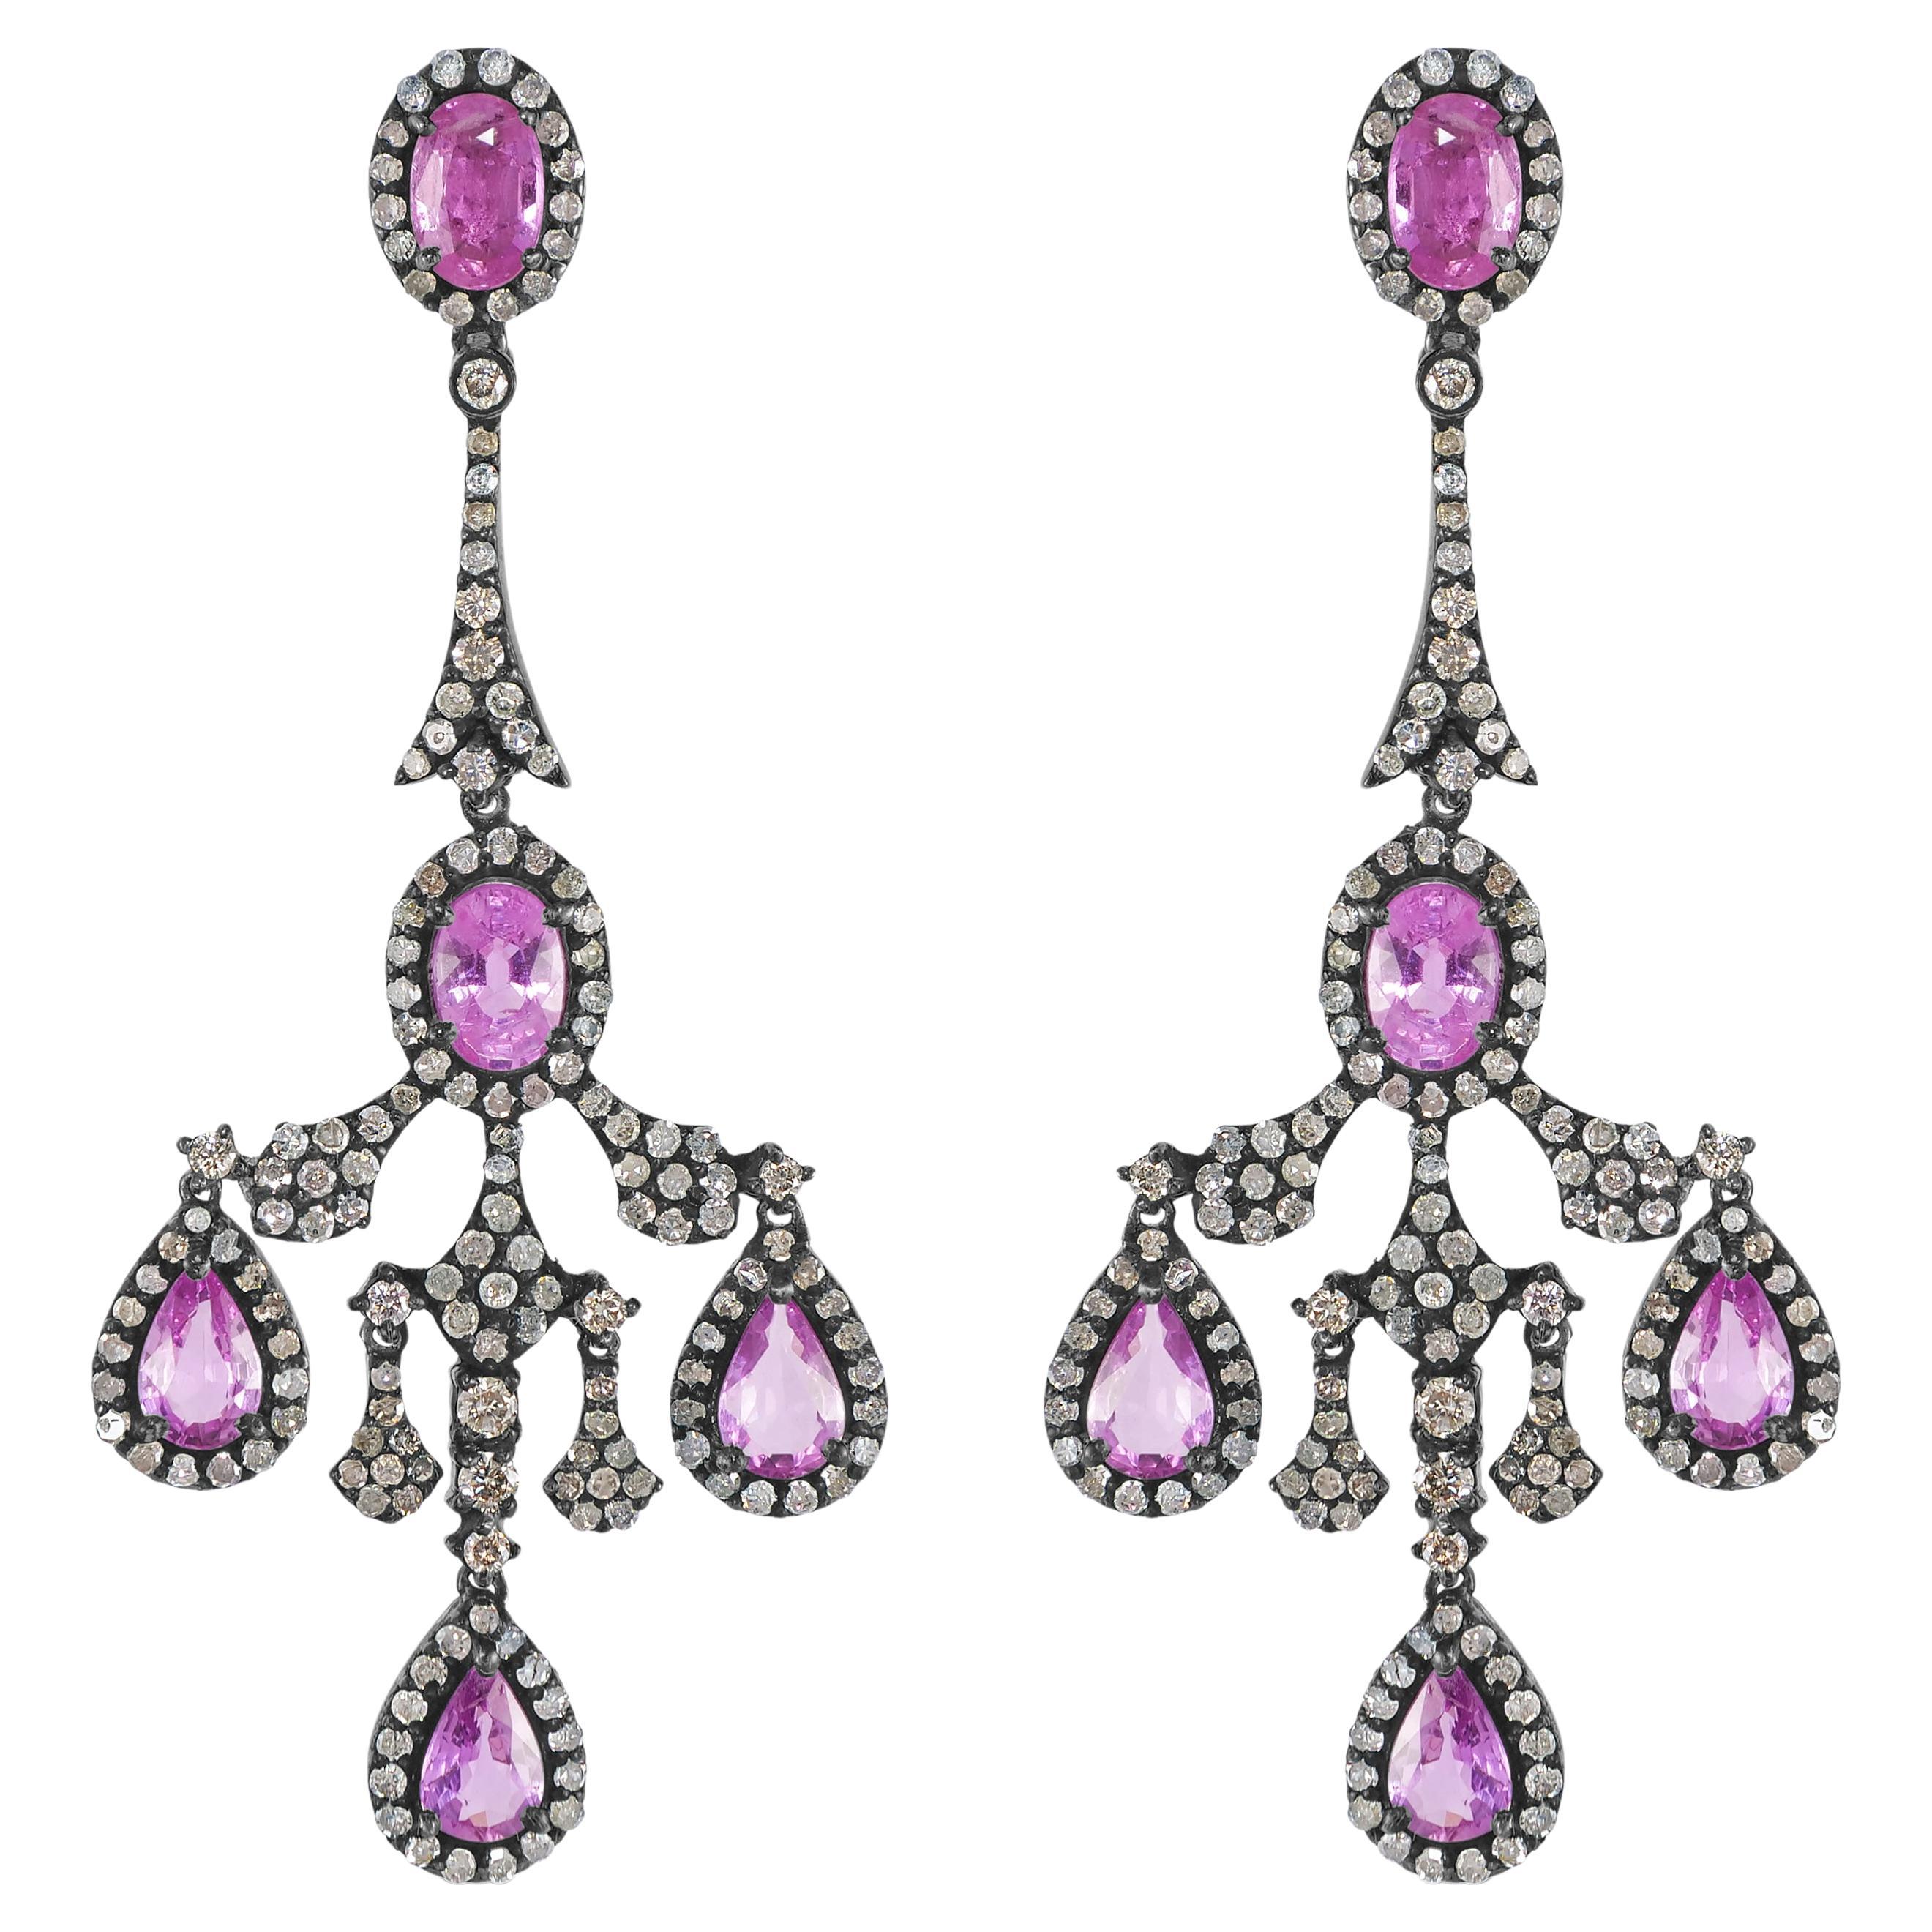 Victorian 6.6 Cttw. Pink Sapphire and Diamond Chandelier Earrings  For Sale